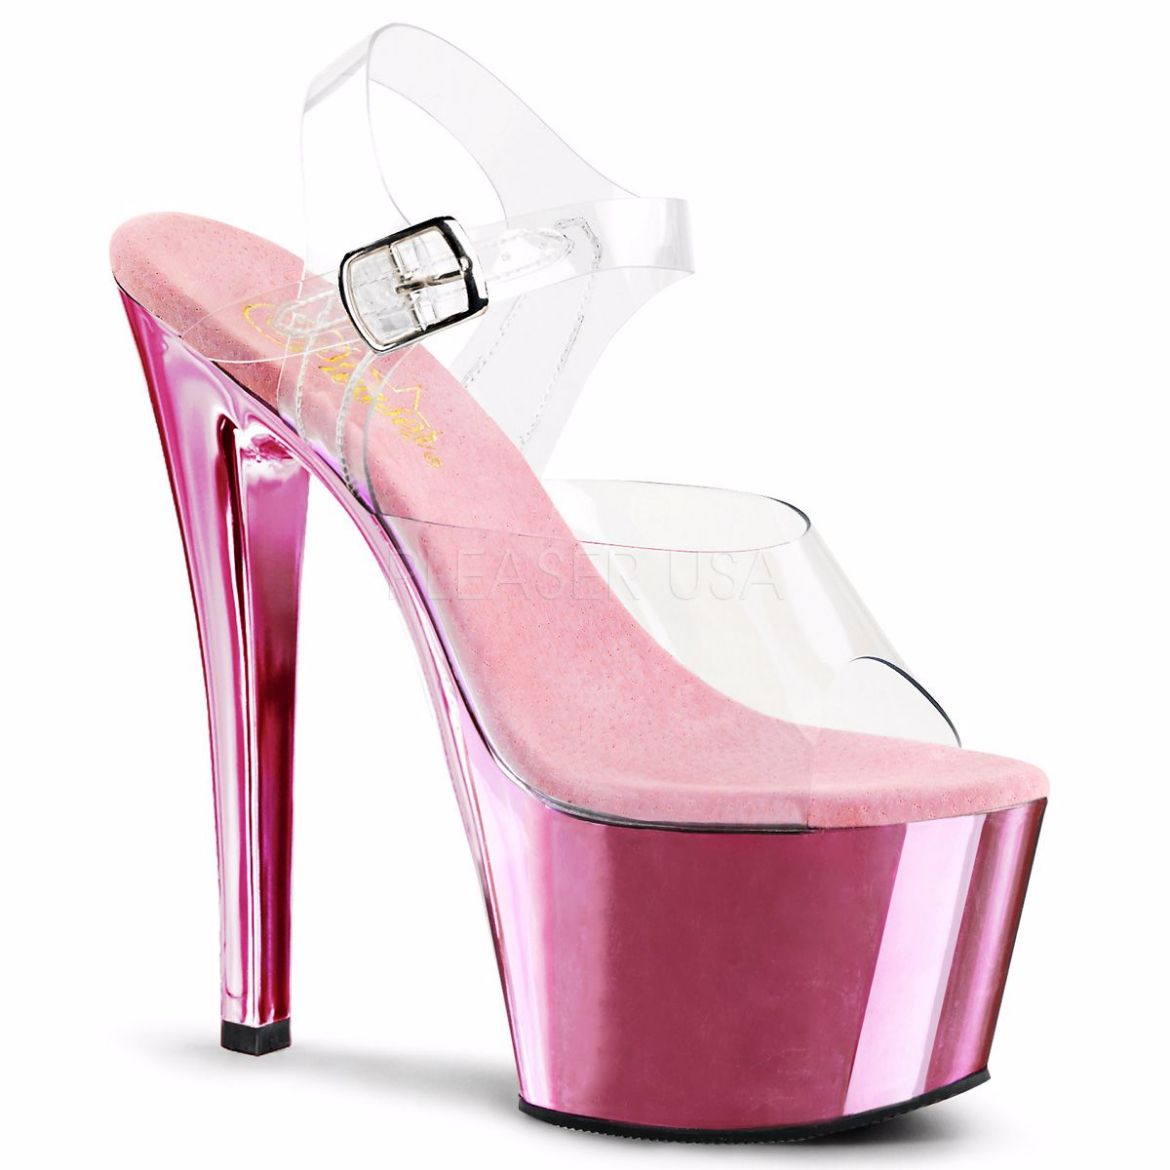 Product image of Pleaser Sky-308 Clear/Baby Pink Chrome, 7 inch (17.8 cm) Heel, 2 3/4 inch (7 cm) Platform Sandal Shoes